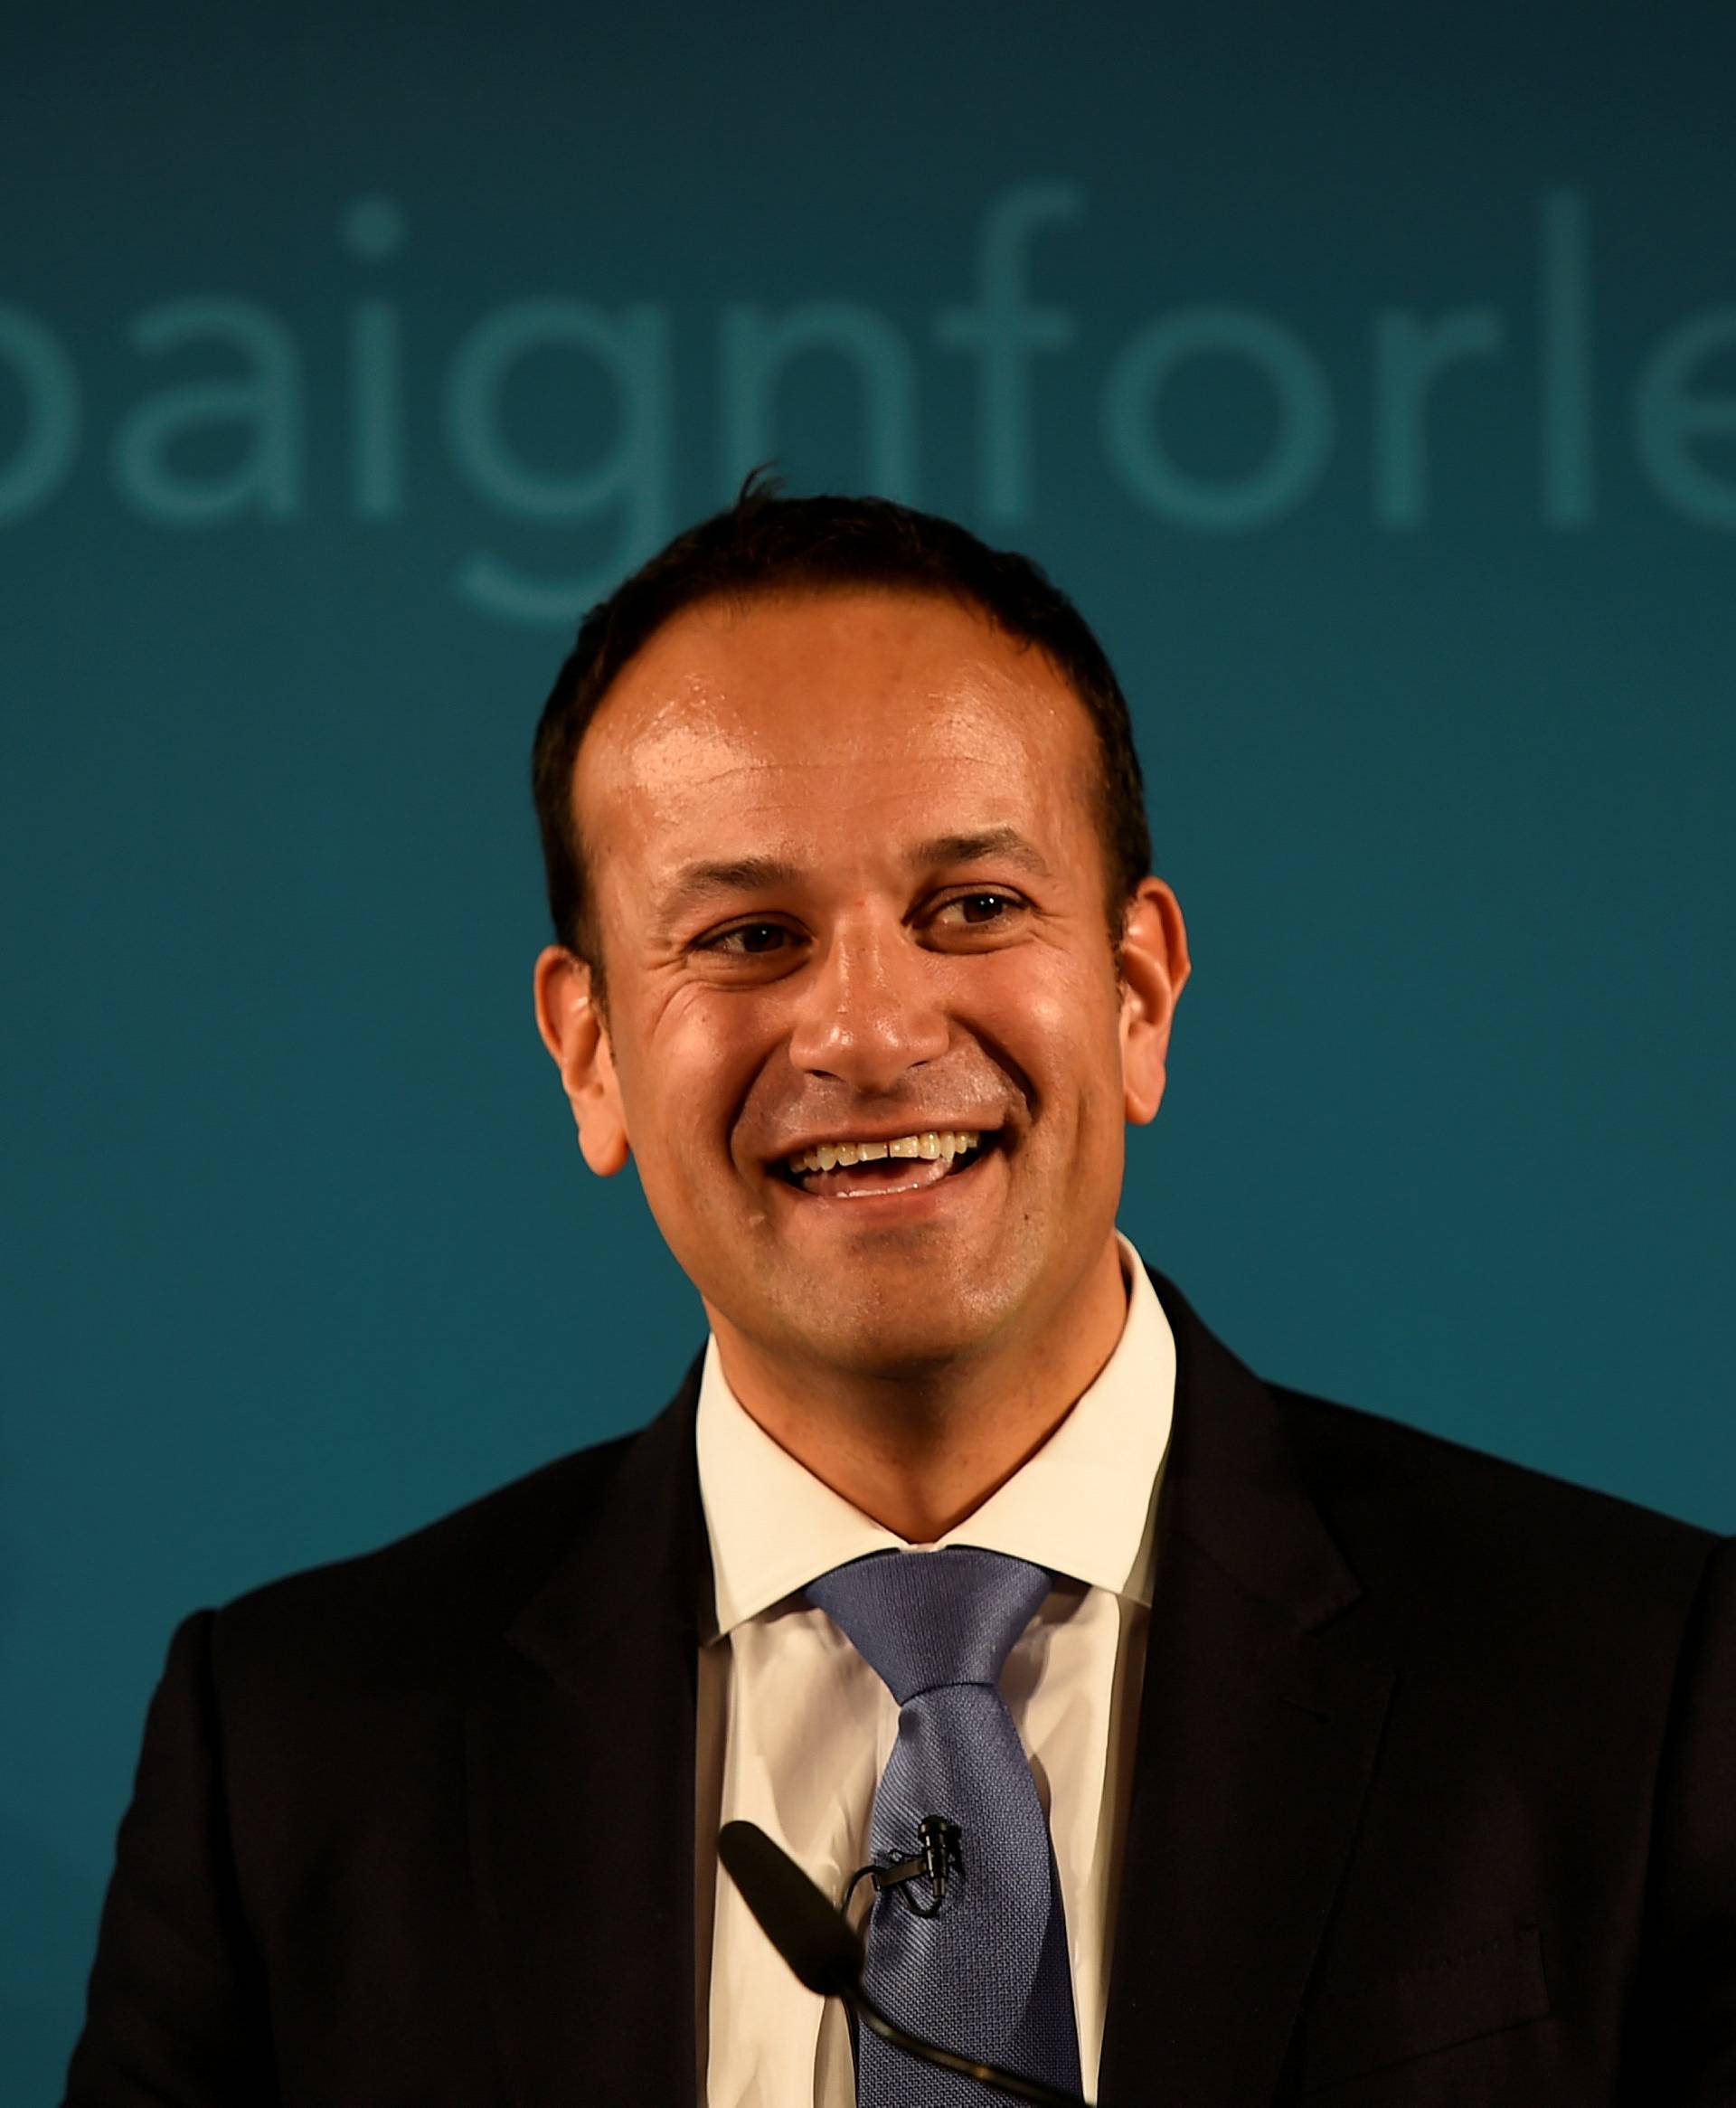 FILE PHOTO: Ireland's Minister for Social Protection Varadkar launches his campaign bid for Fine Gael party leader in Dublin